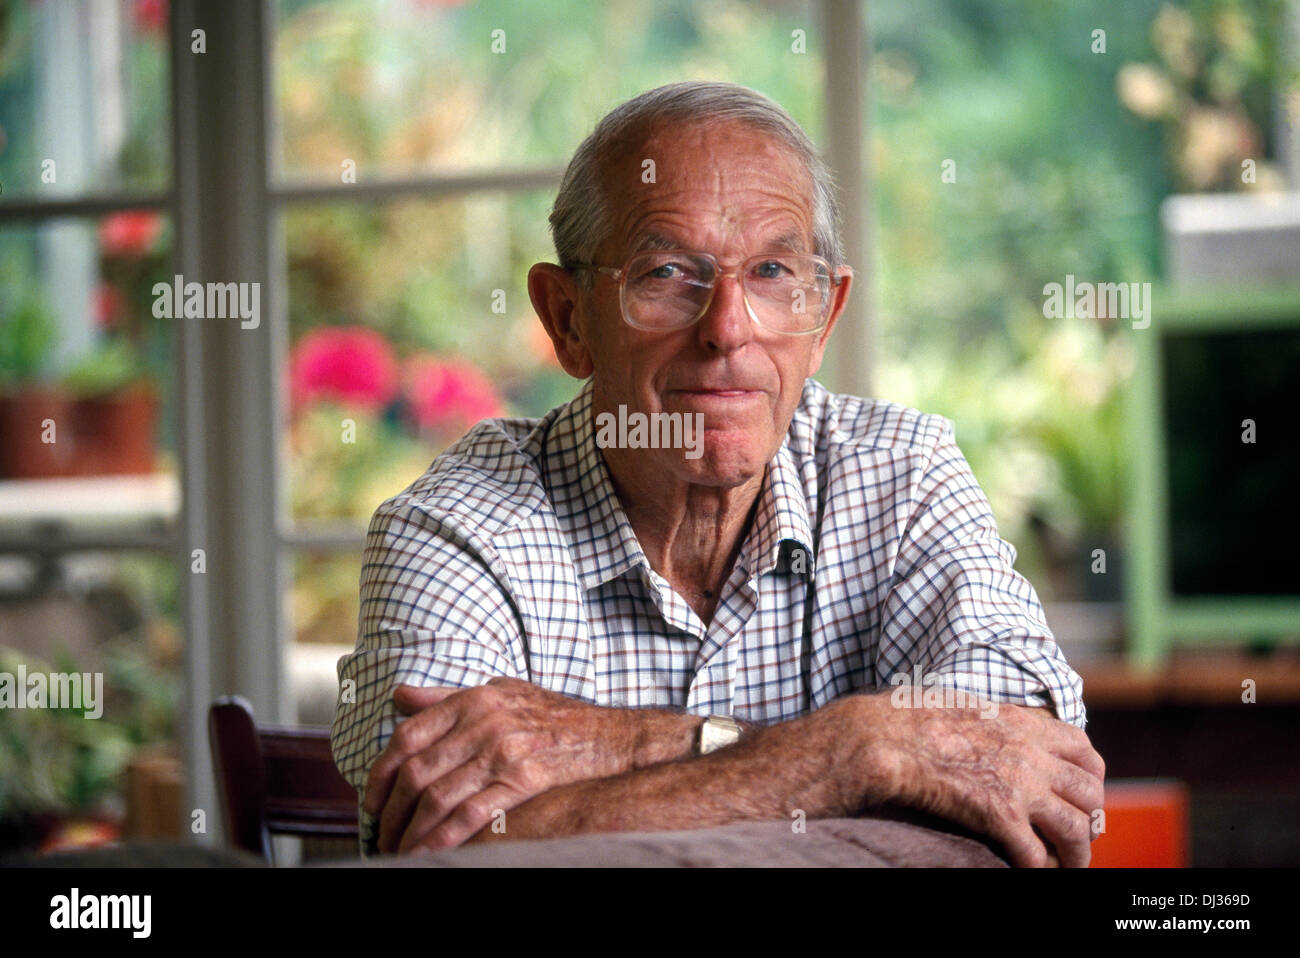 Sir Frederick Sanger, two times Nobel Prize winner for Chemistry in 1958 and 1980,  has died today November 19, 2013 aged 95 FILE PHOTO shows Sir Frederick Sanger at home in Swaffham Walbeck, Cambridgeshire, on August 3, 1993. Sanger Photo Credit: David Levenson / Alamy Live News Stock Photo